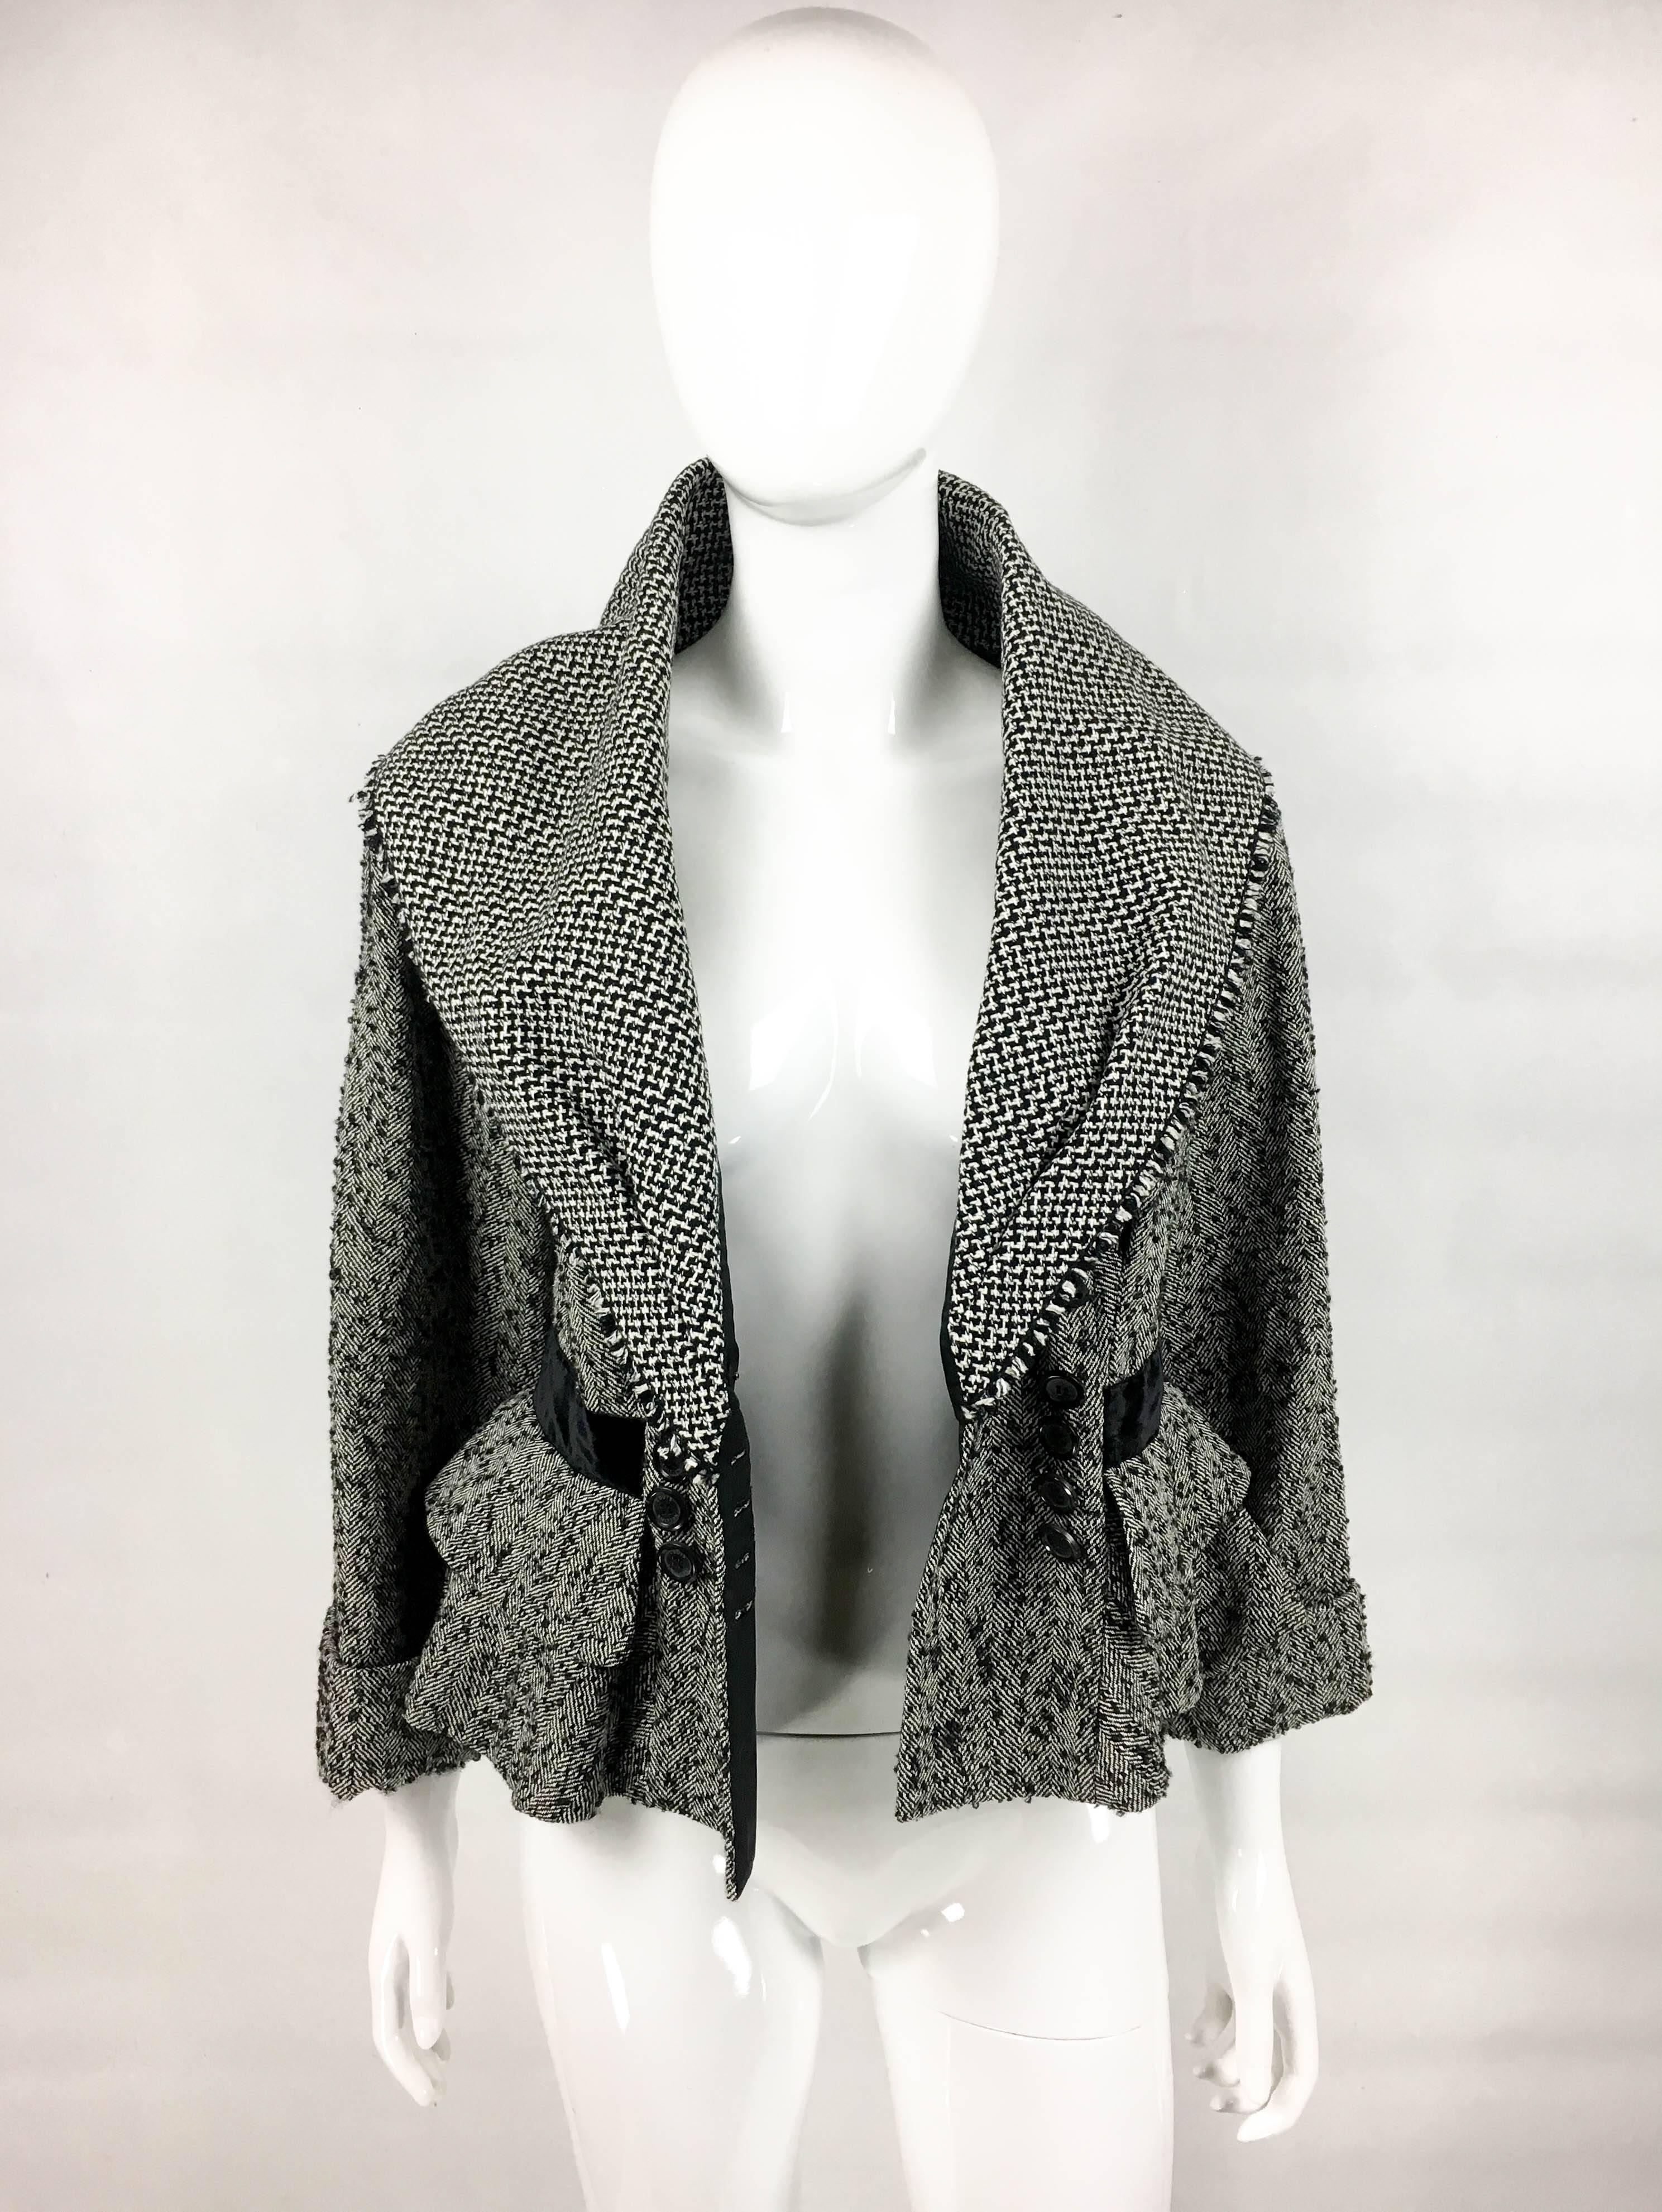 Women's Louis Vuitton Black and White Tweed Jacket With Dramatic Collar - 21st Century